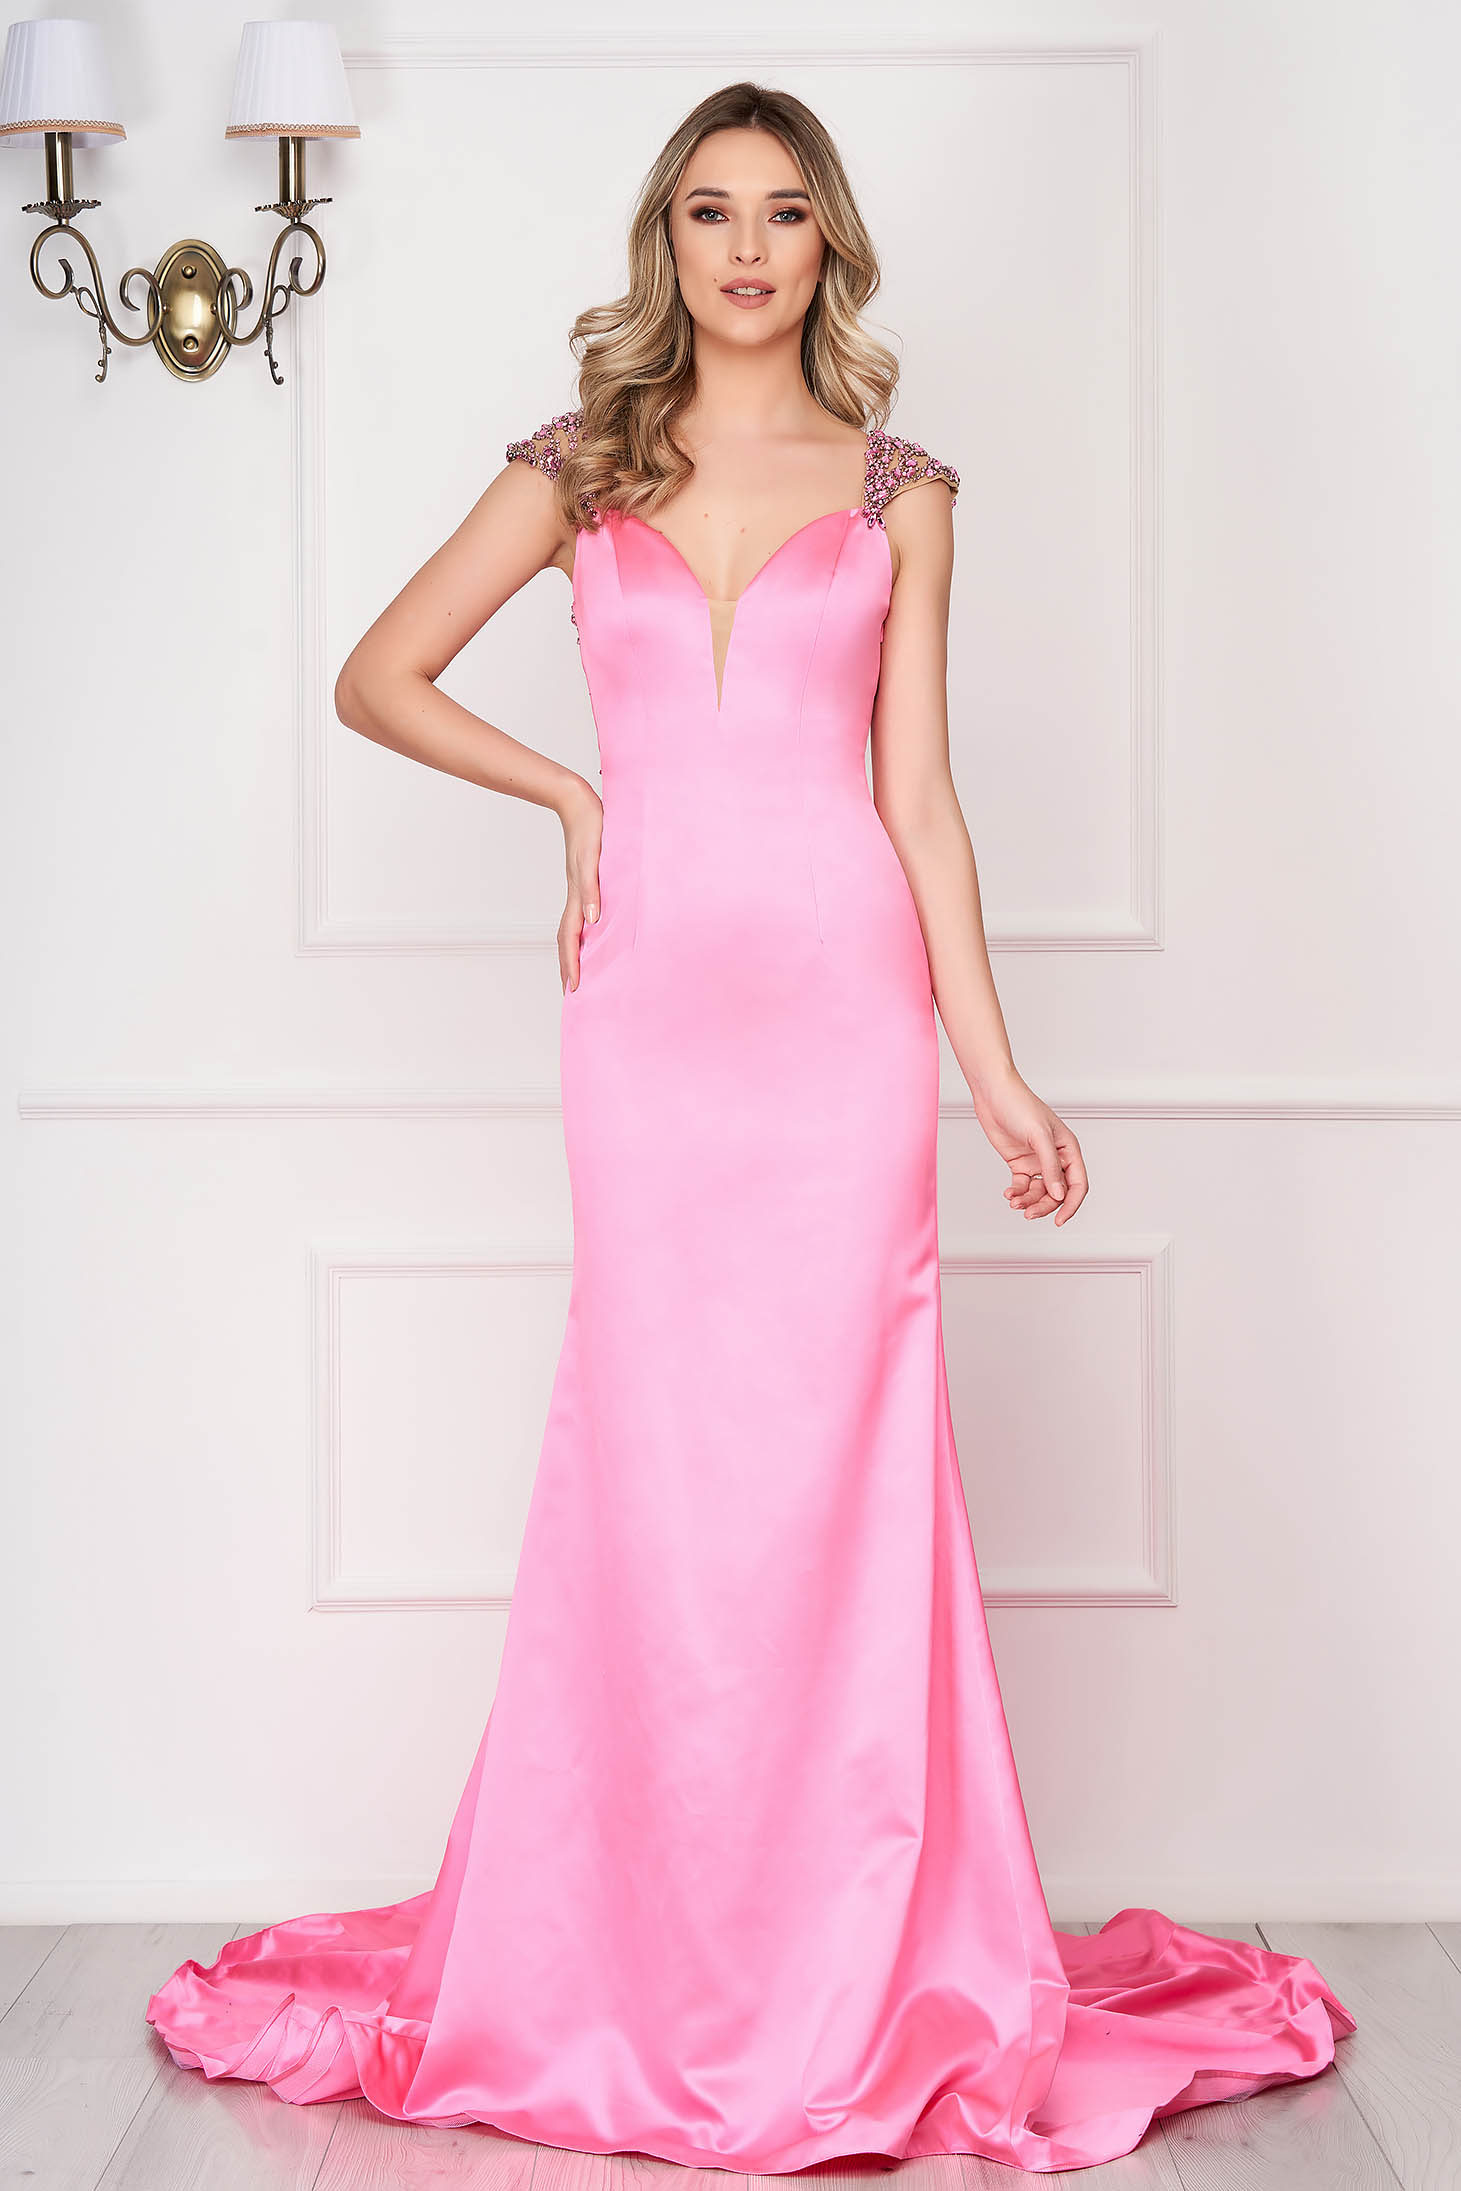 Sherri Hill pink dress luxurious long mermaid cut strass with braces with a cleavage 1 - StarShinerS.com